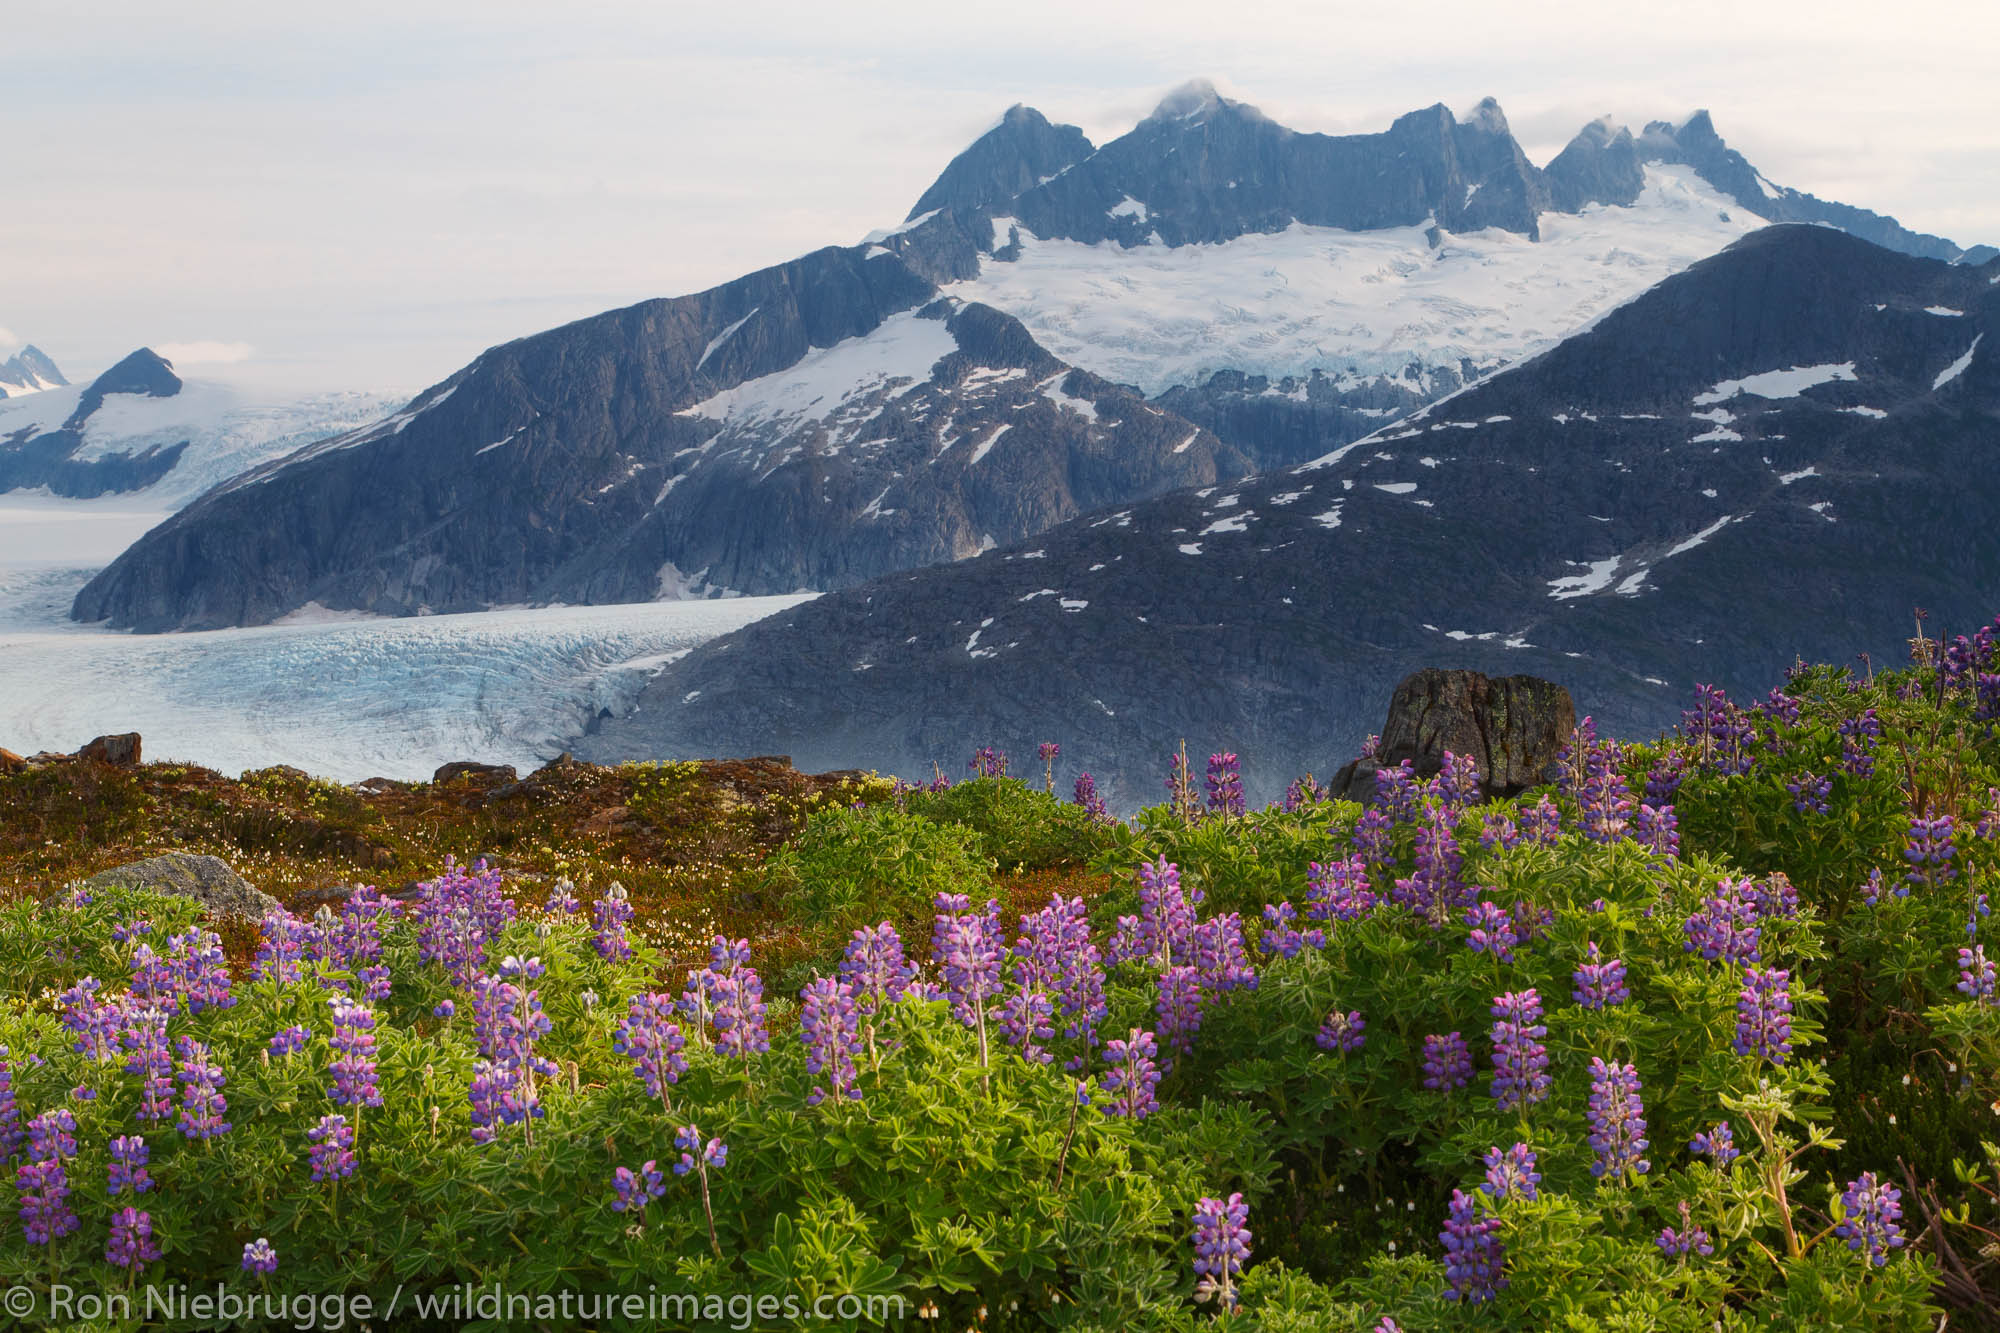 From Mount Stroller White above the Mendenhall Glacier, Tongass National Forest, Alaska